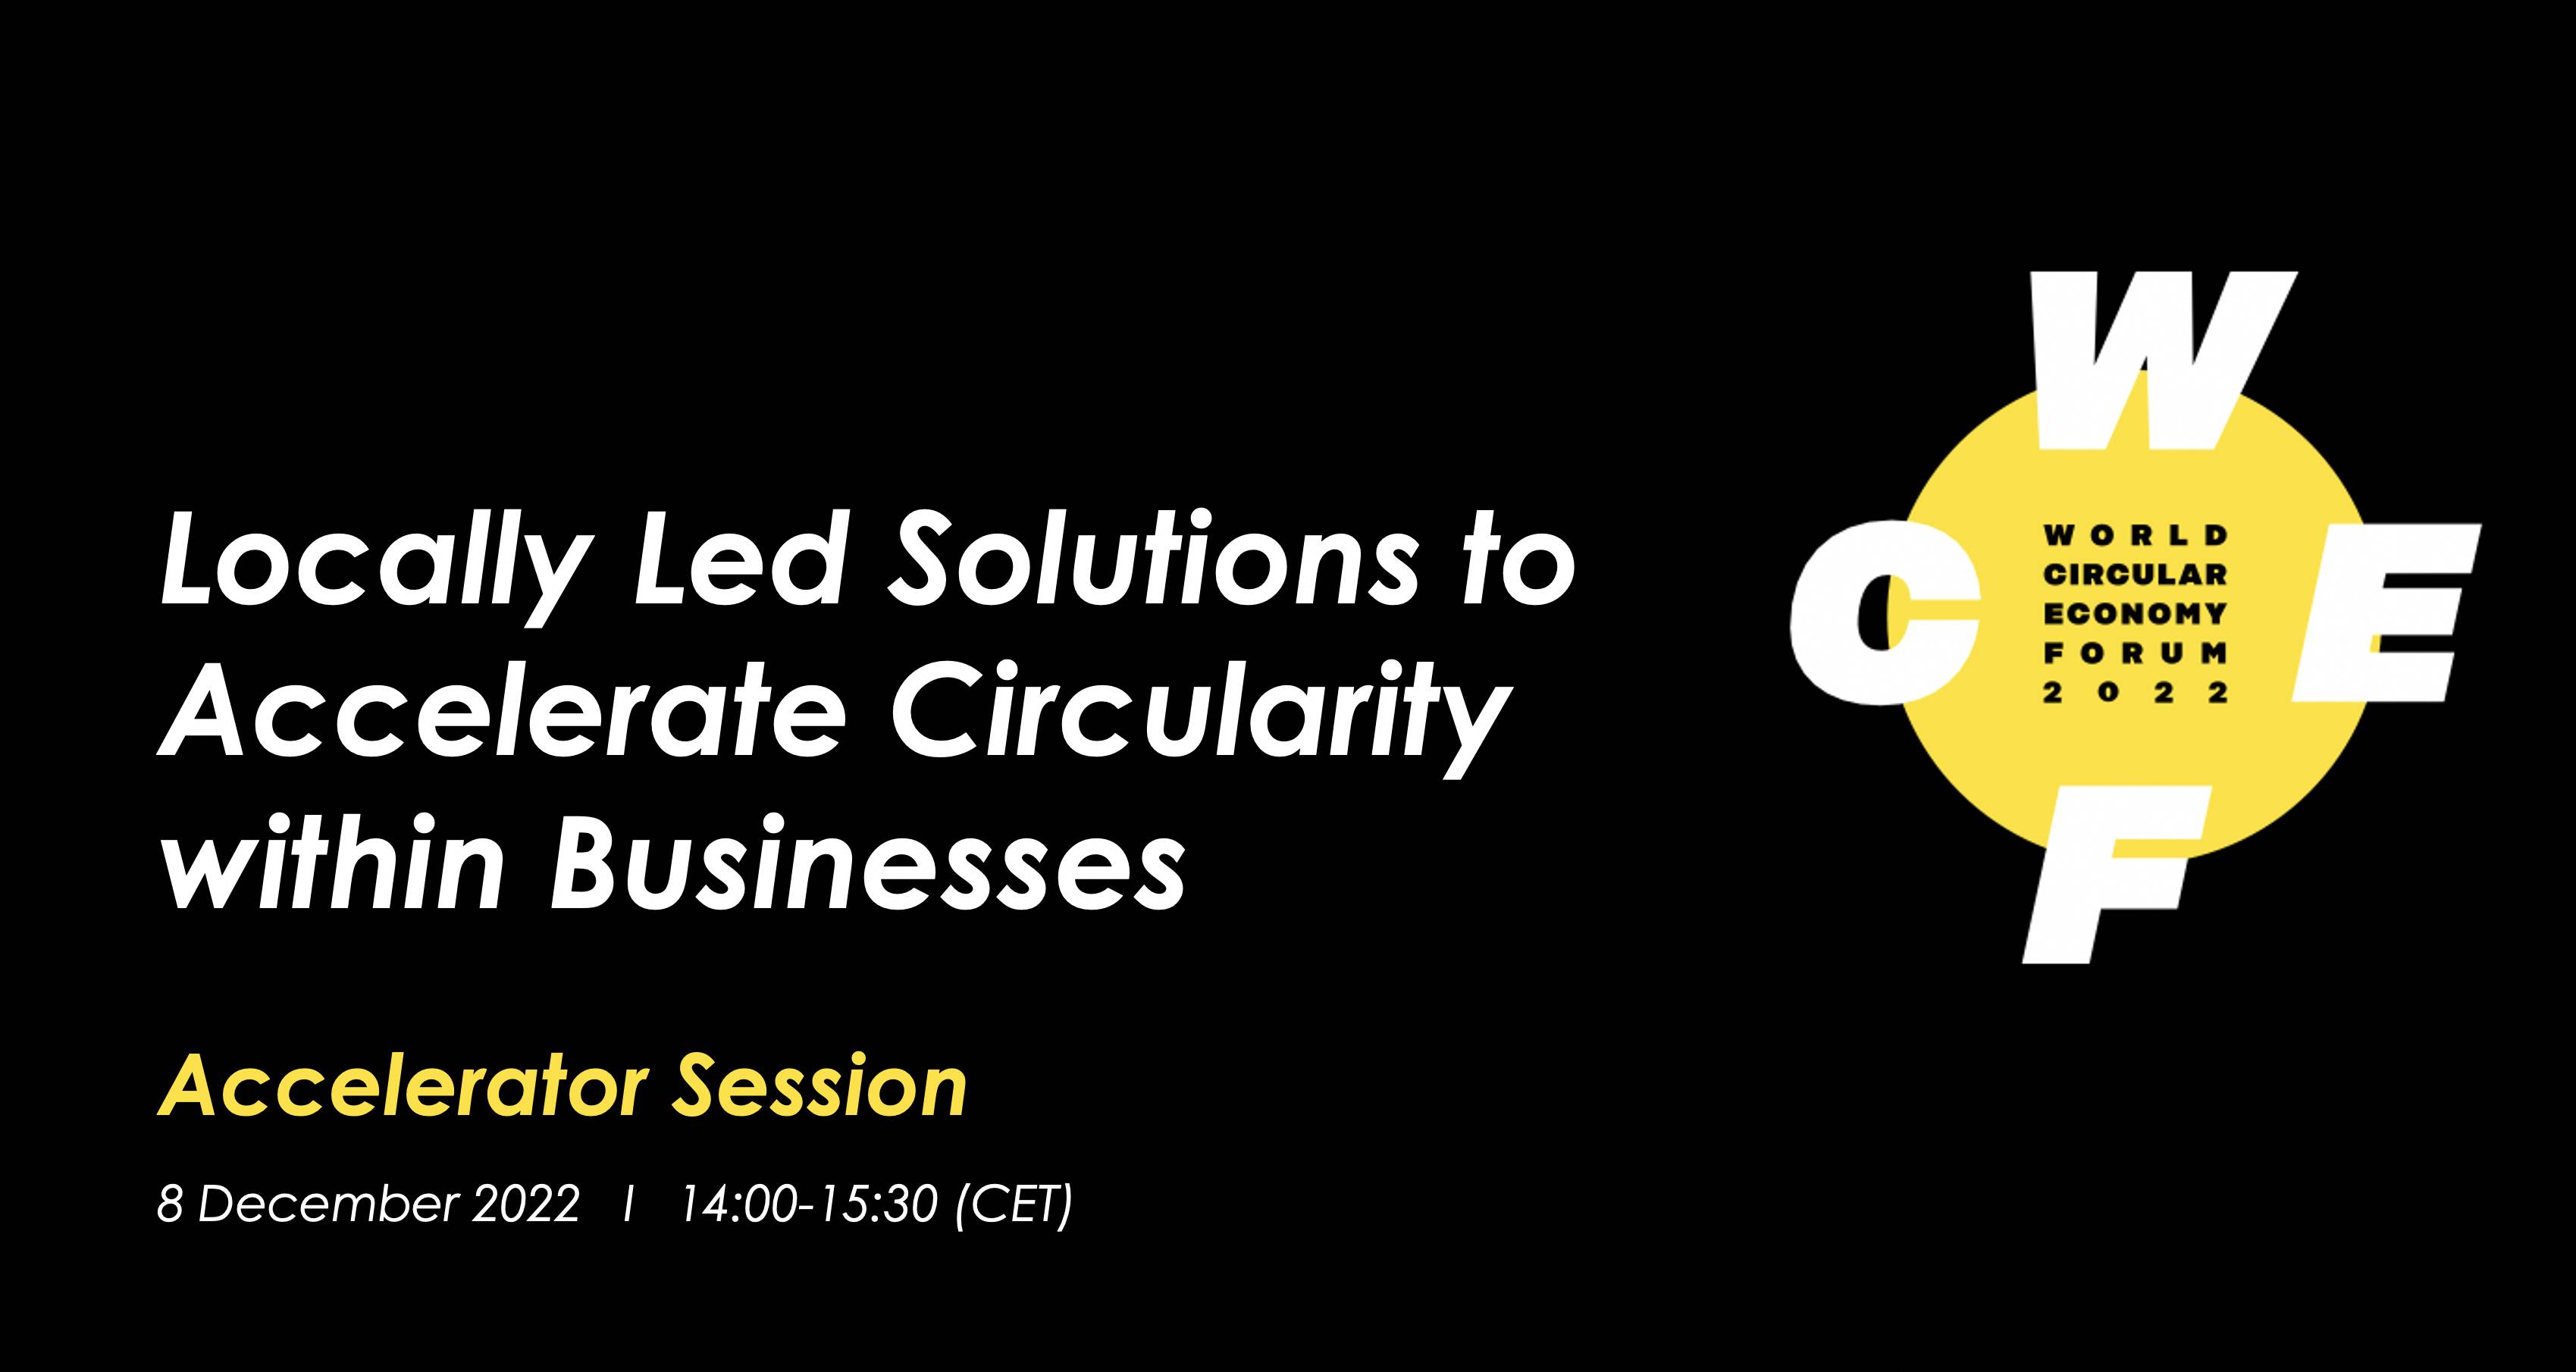 Event -Locally Led Solutions to Accelerate Circularity within Businesses